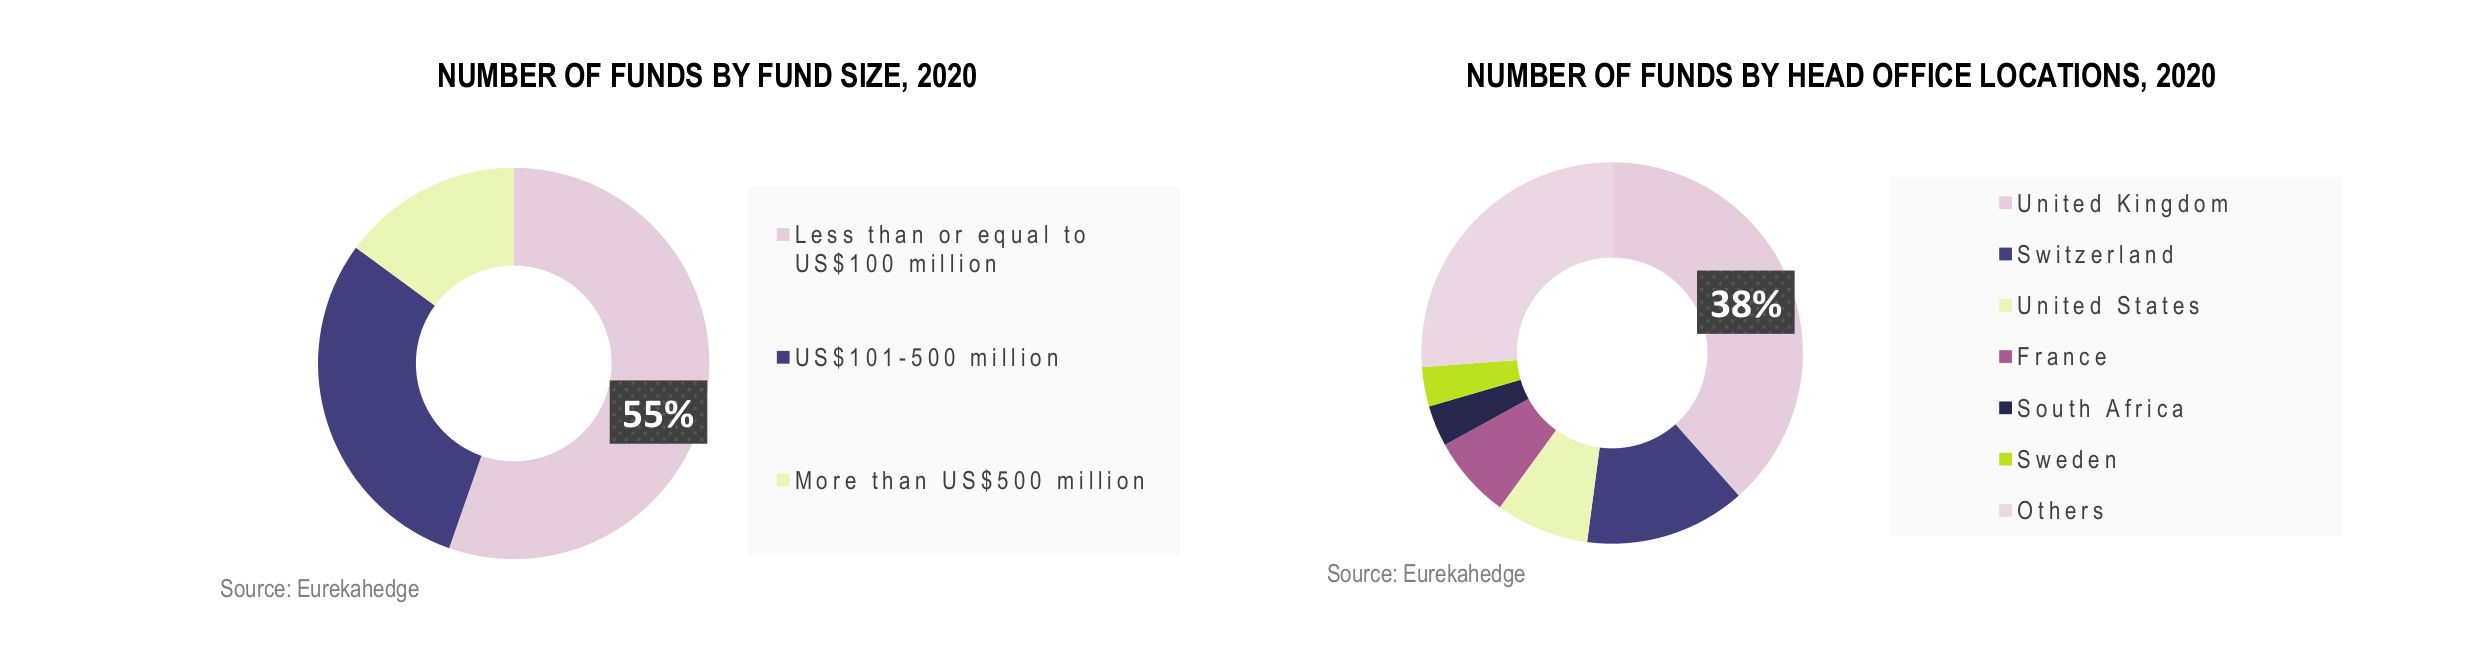 European Hedge Funds Infographic December 2020 - number of funds by fund size and head office